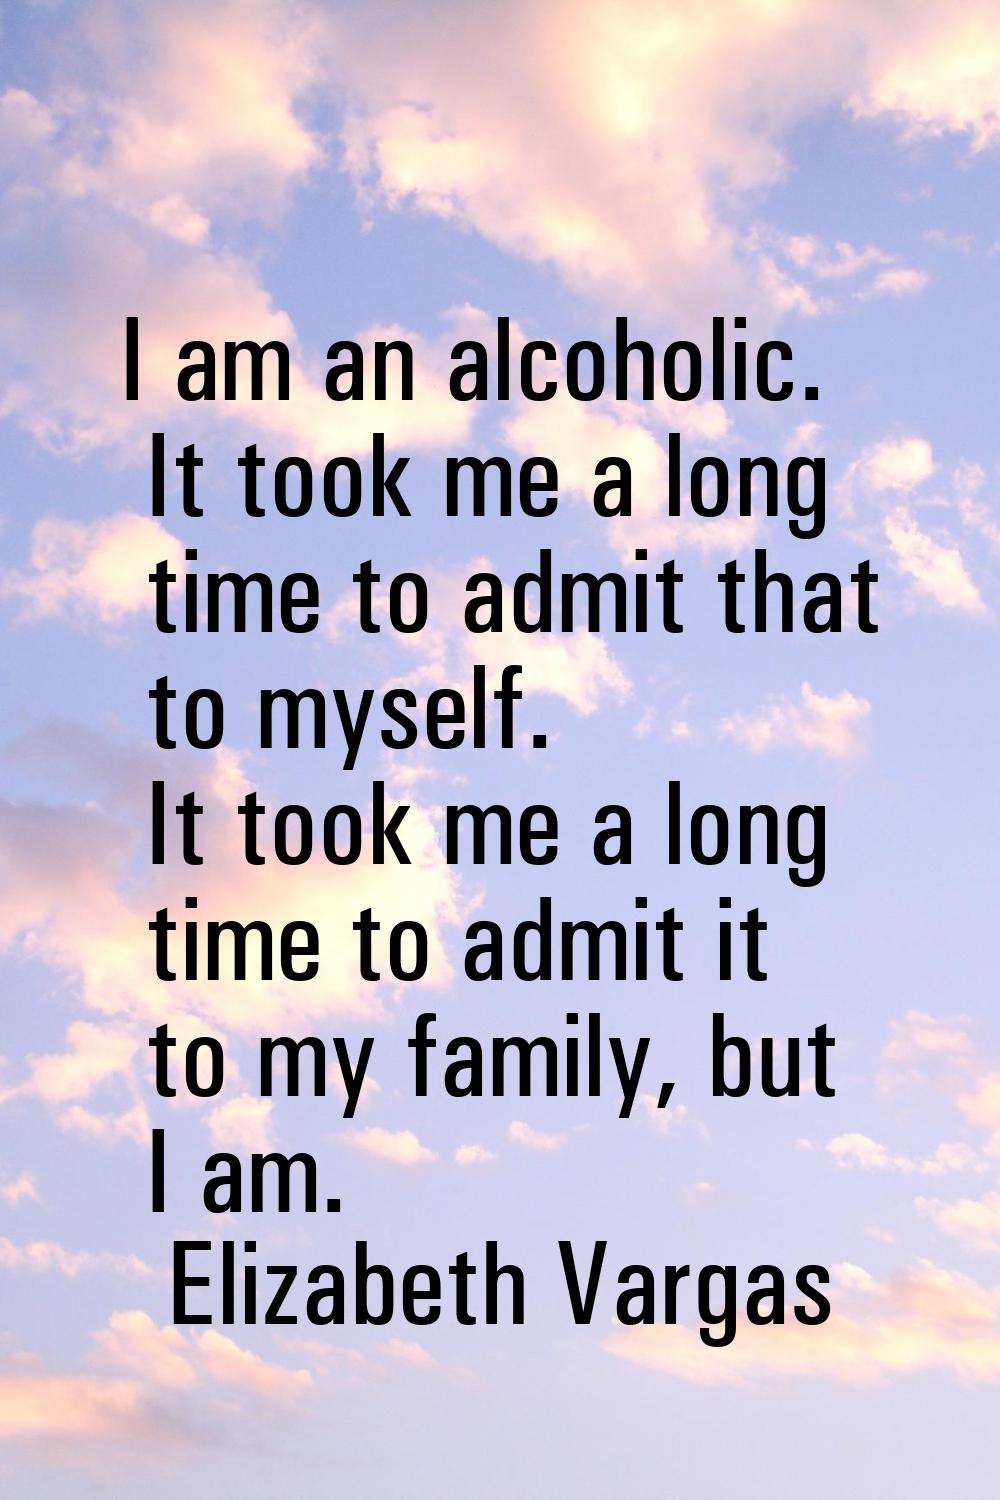 I am an alcoholic. It took me a long time to admit that to myself. It took me a long time to admit 